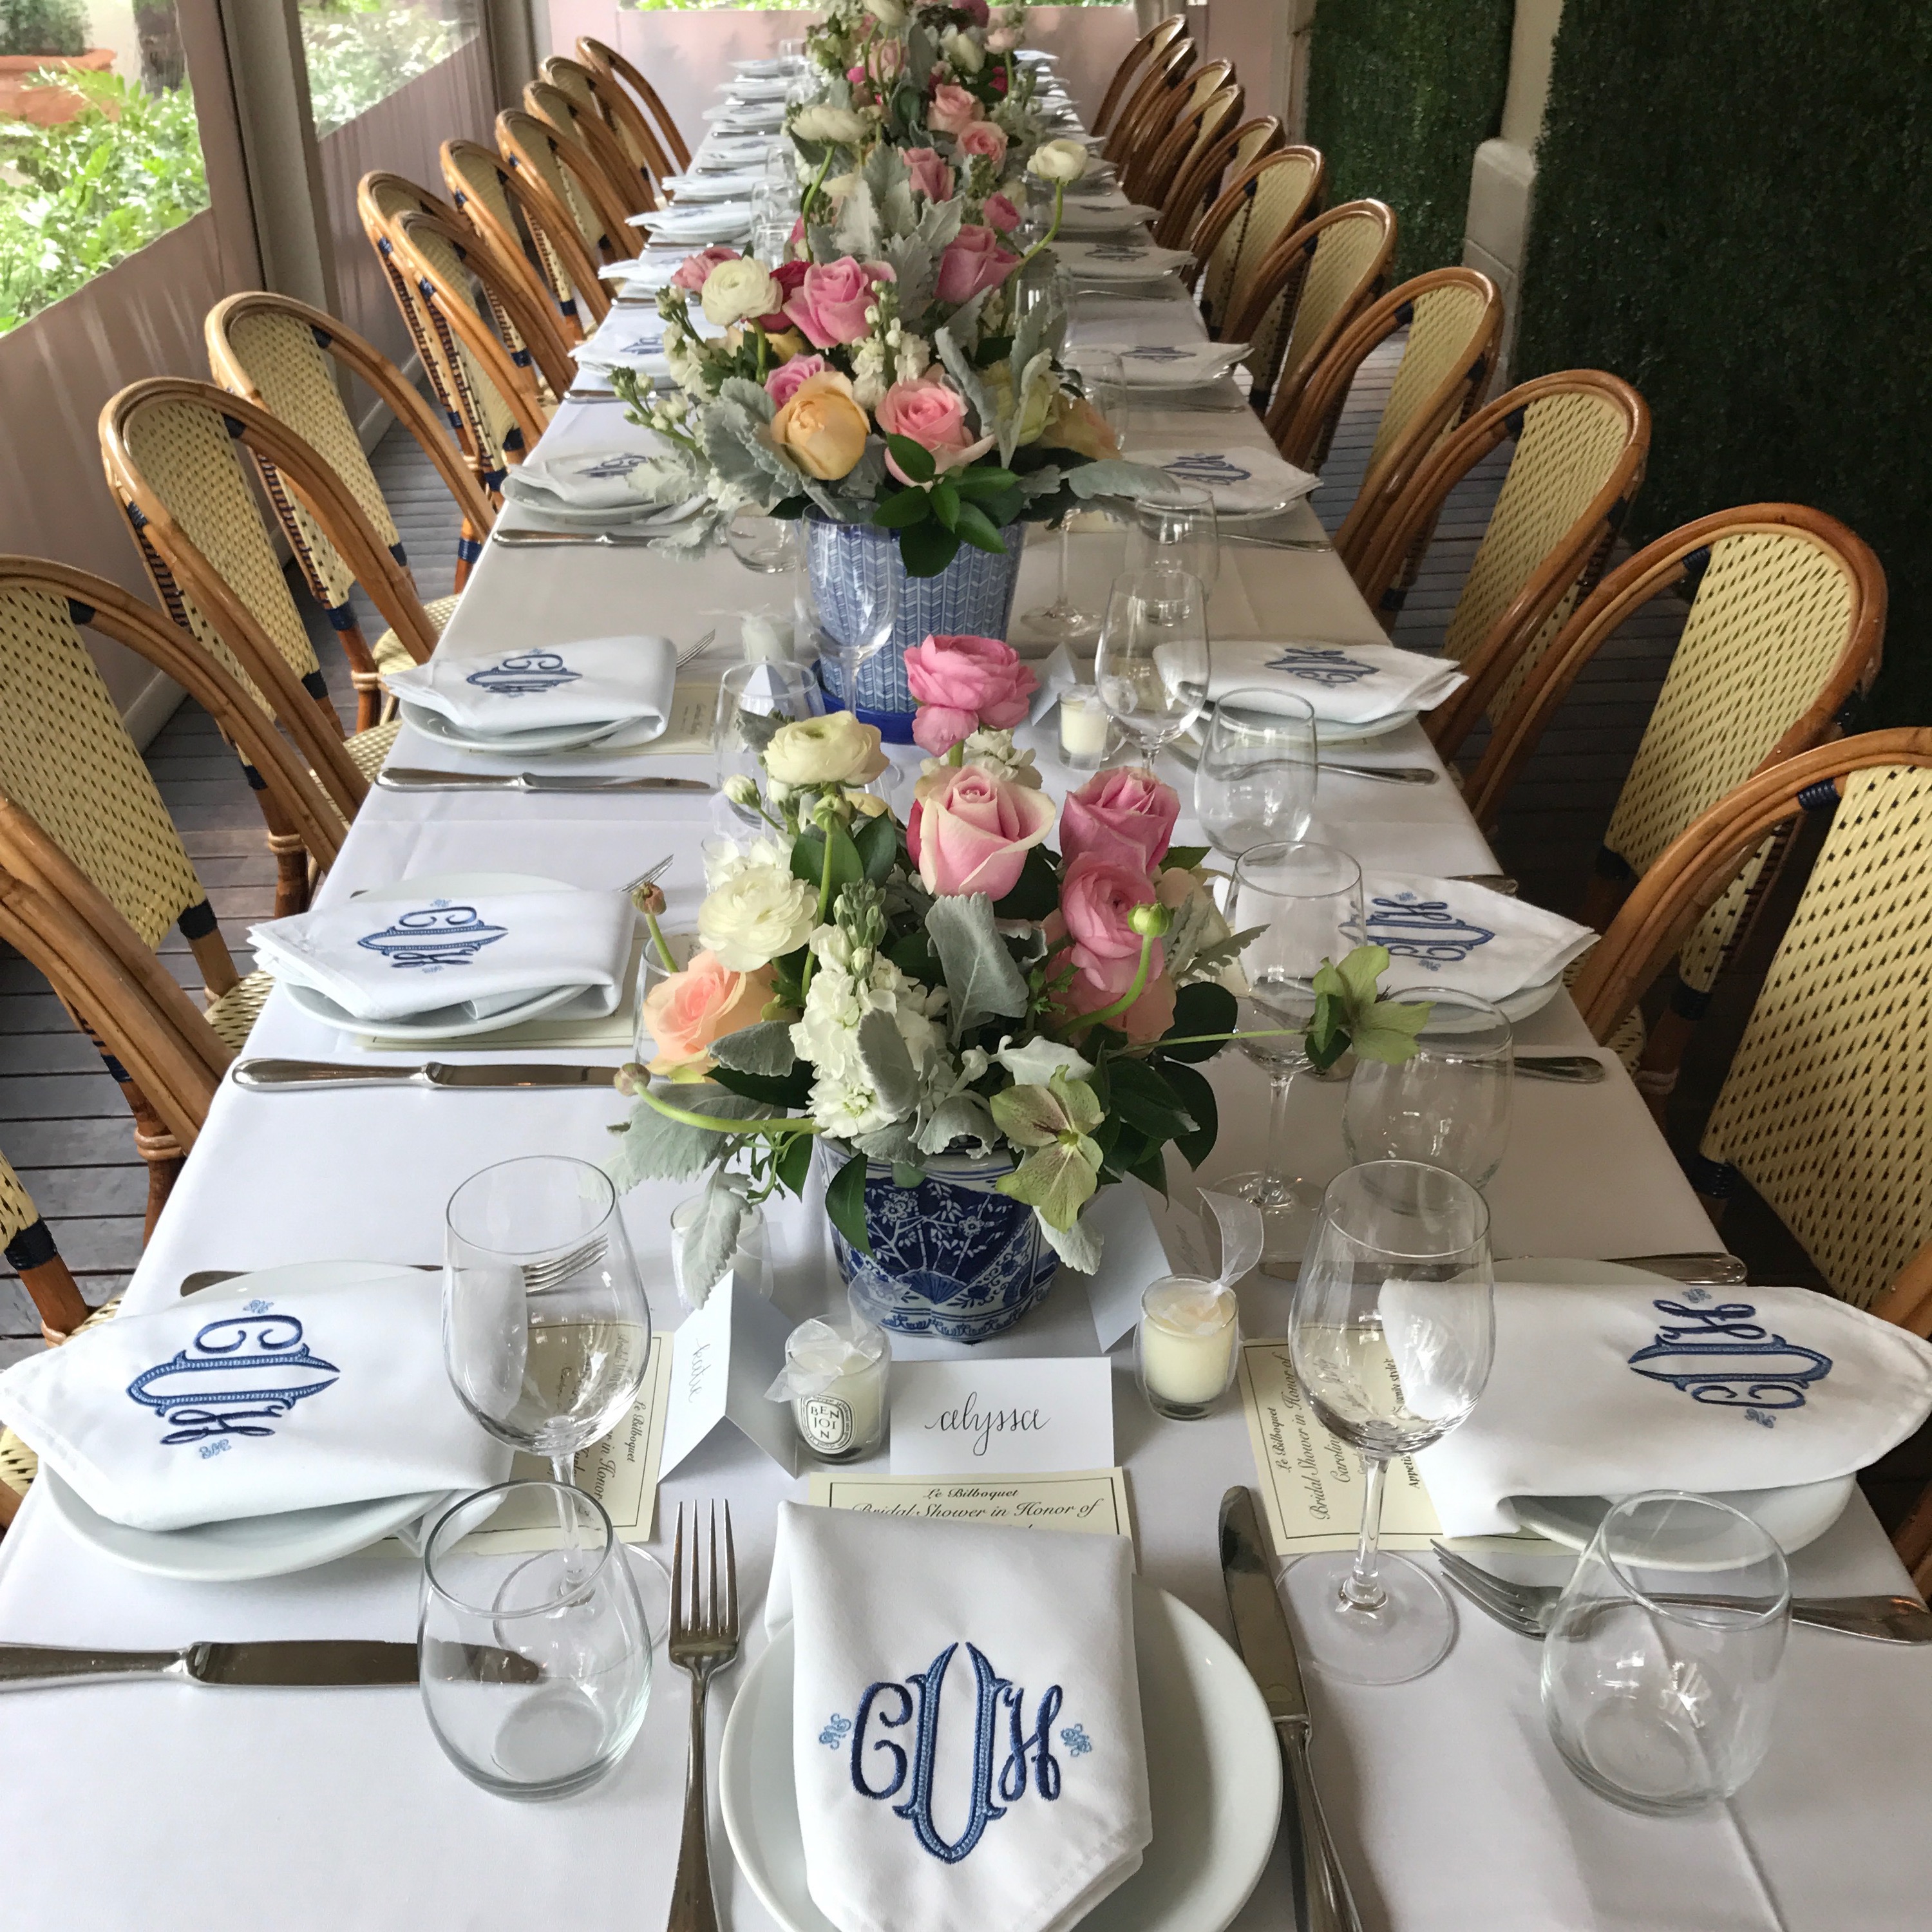 Bridal Shower by Christina Dandar for The Potted Boxwood 19